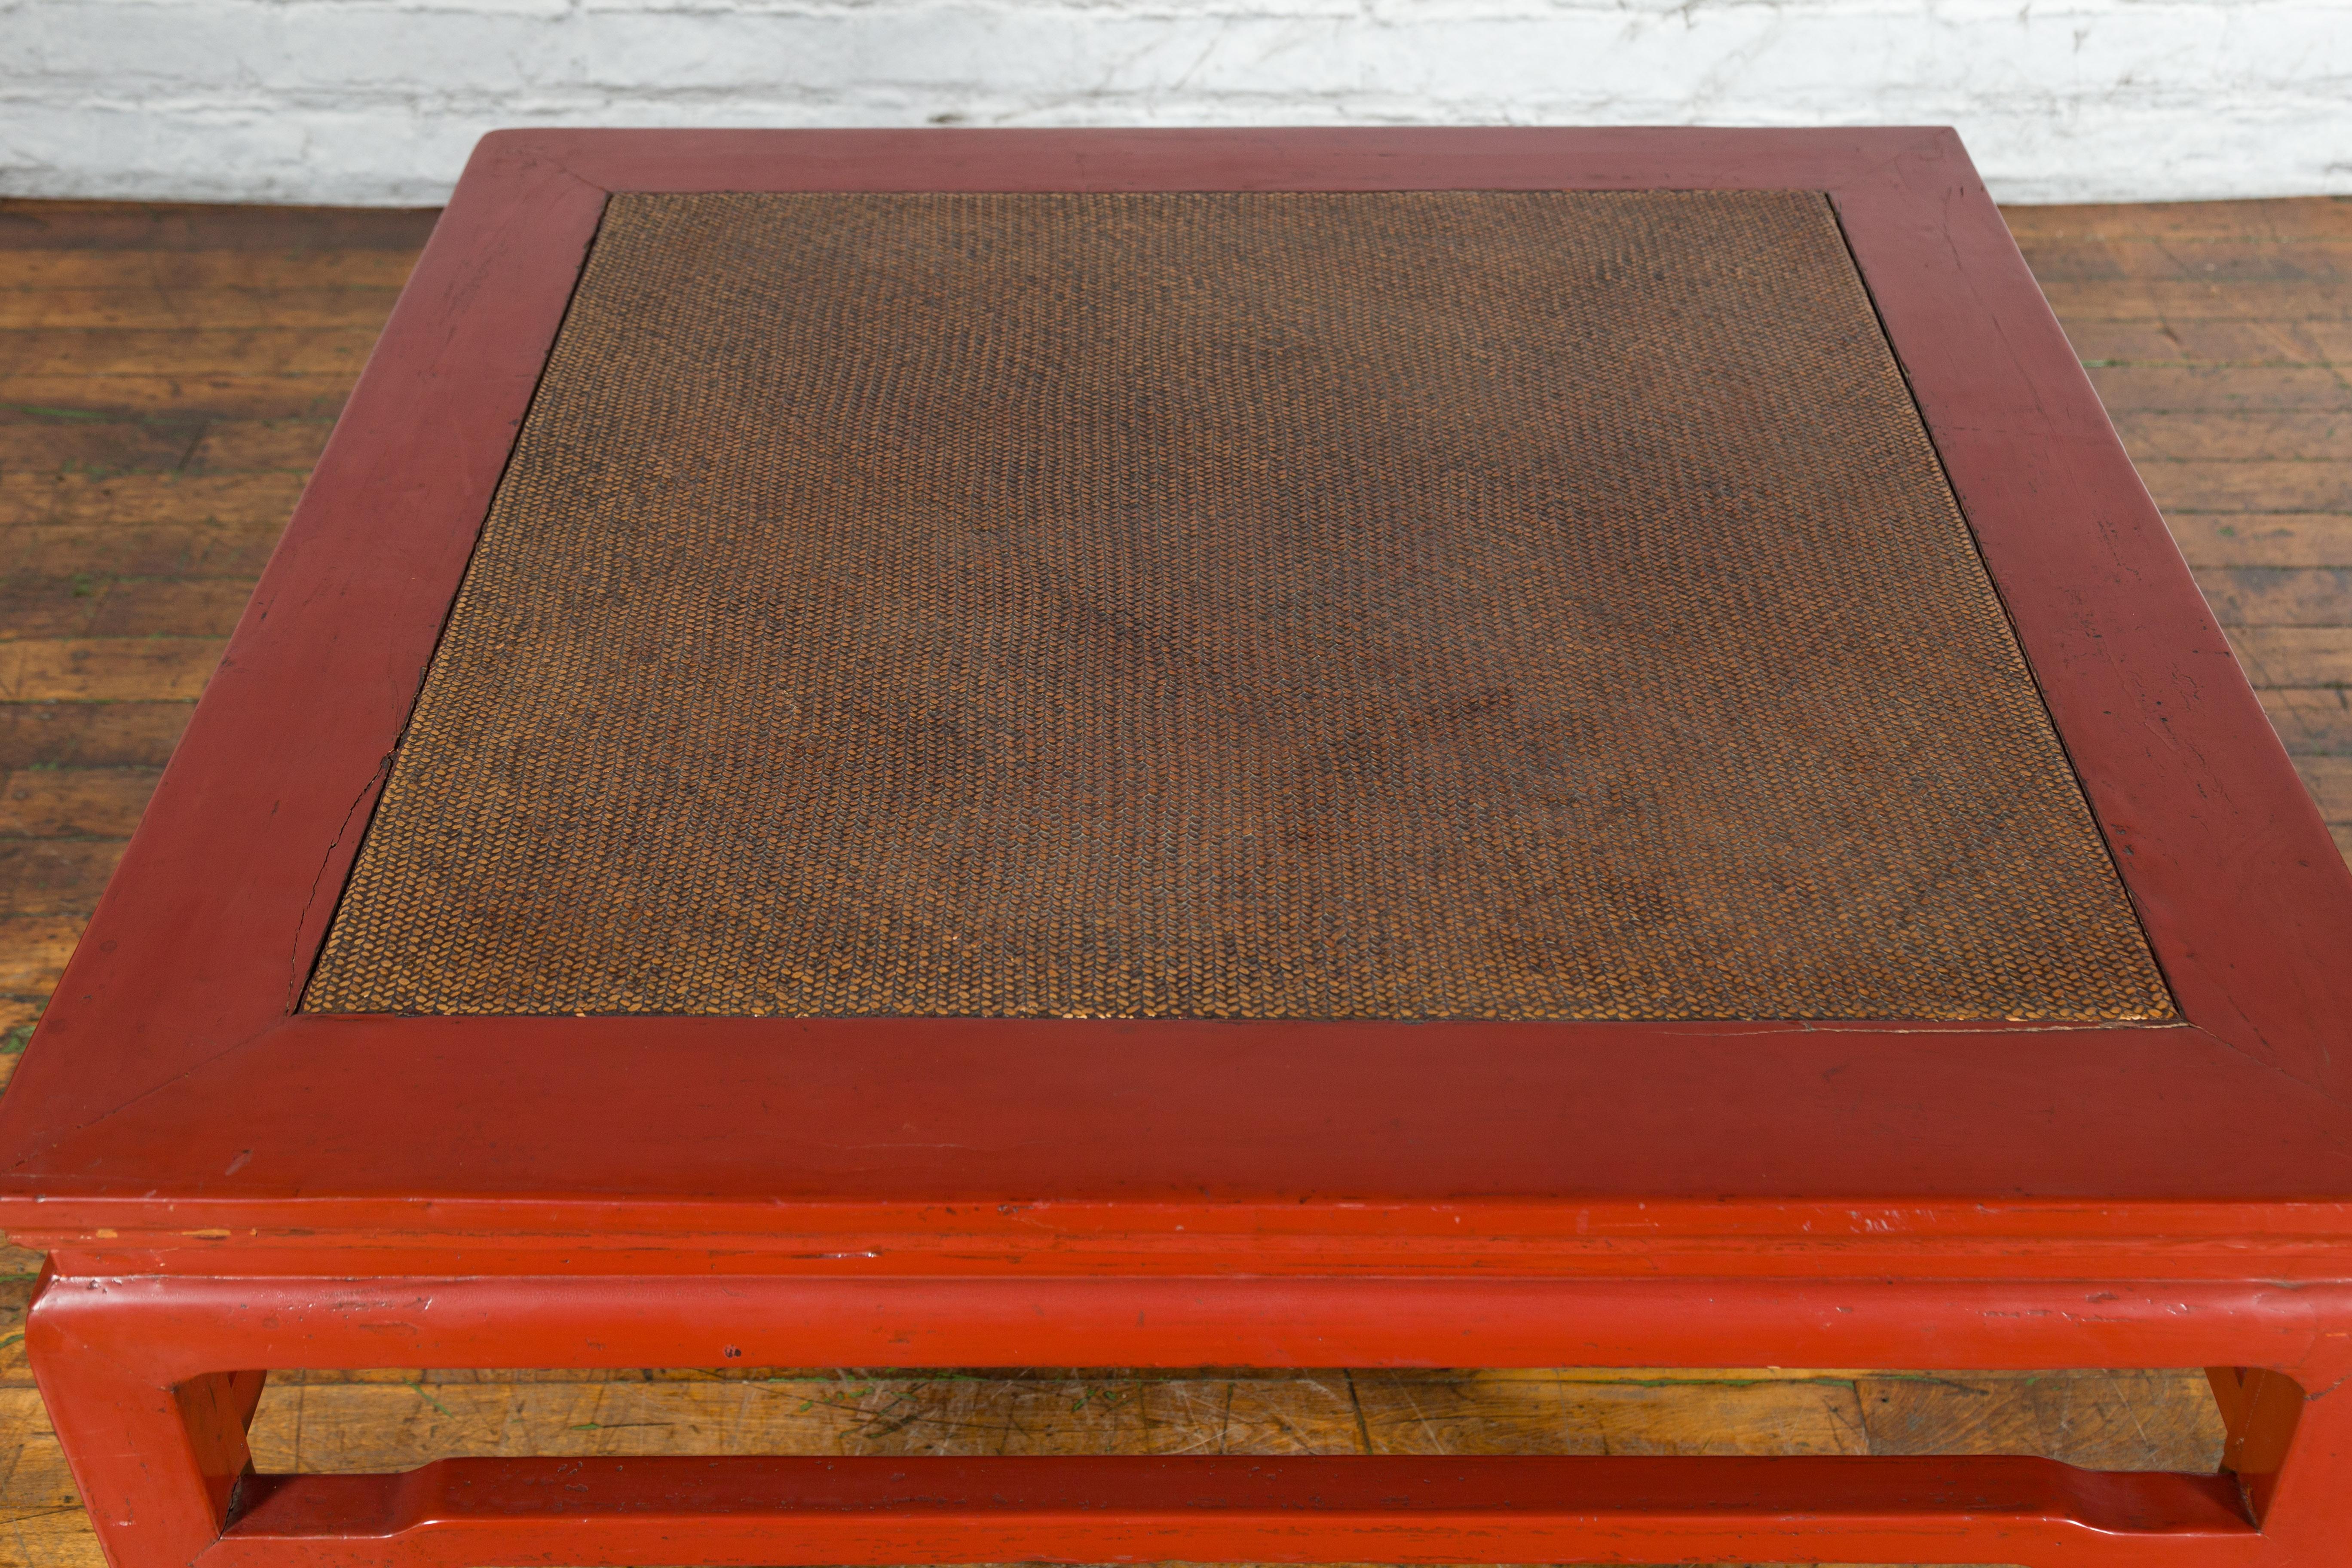 Chinese Early 20th Century Red Lacquer Coffee Table with Hand-Woven Rattan Top For Sale 3